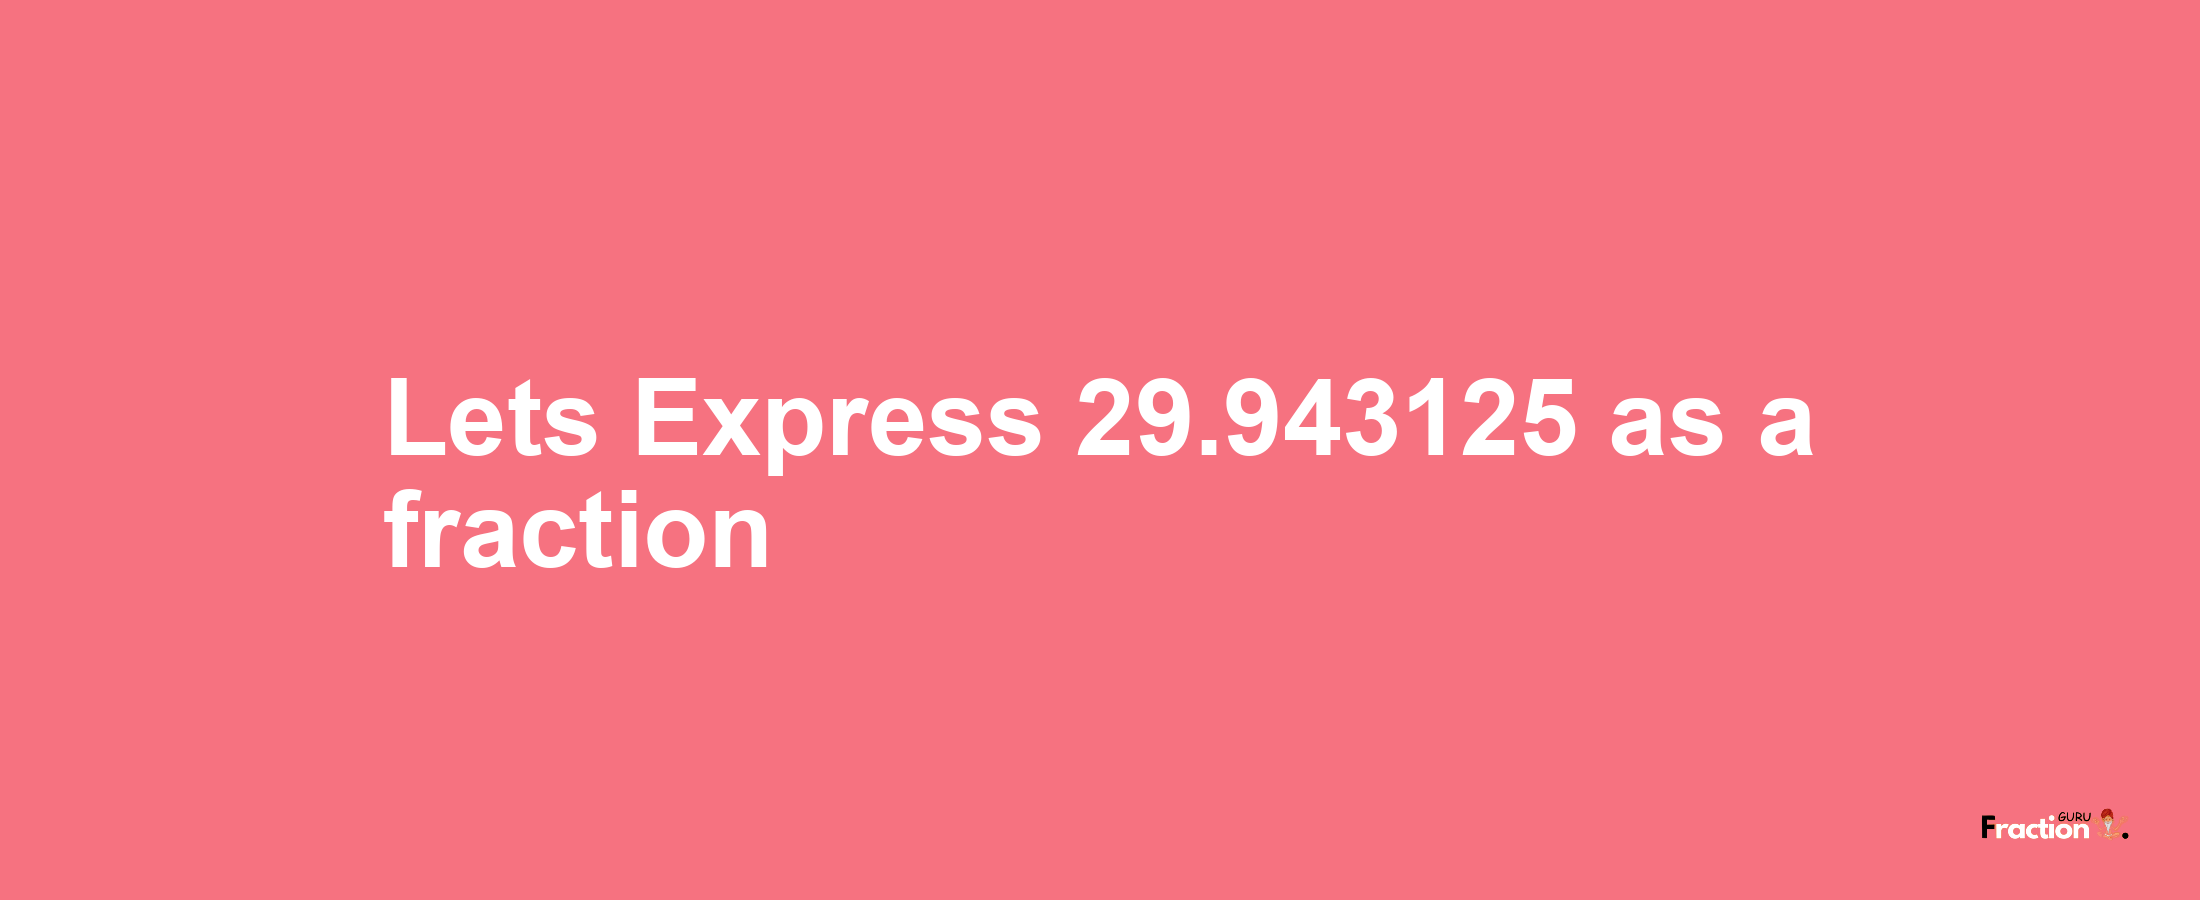 Lets Express 29.943125 as afraction